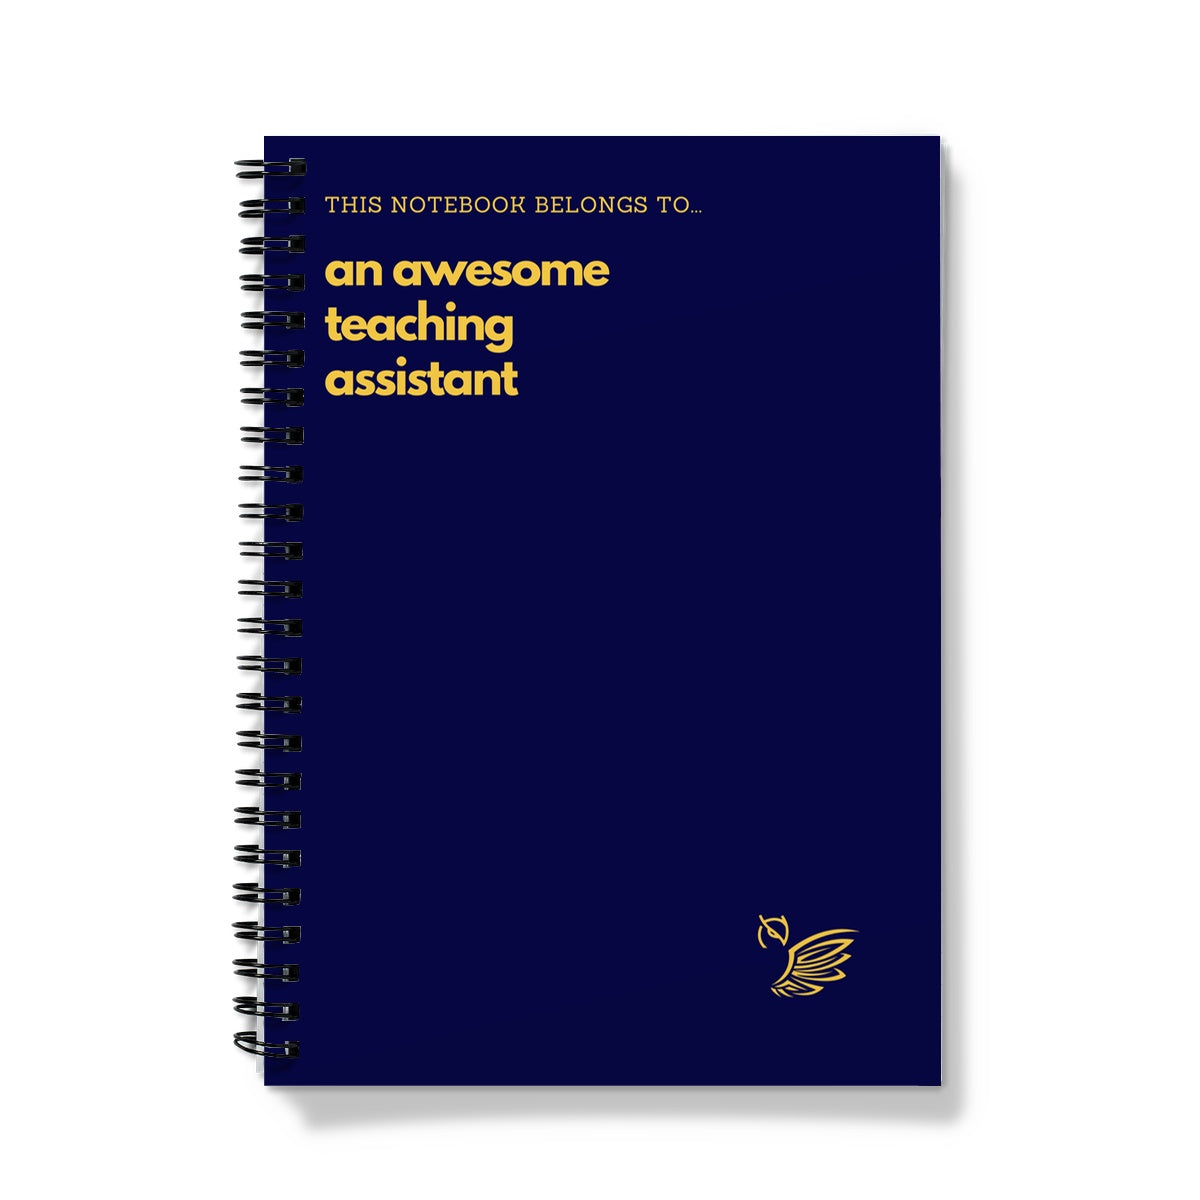 This Book Belongs To... An Awesome Teaching Assistant - Blue Notebook